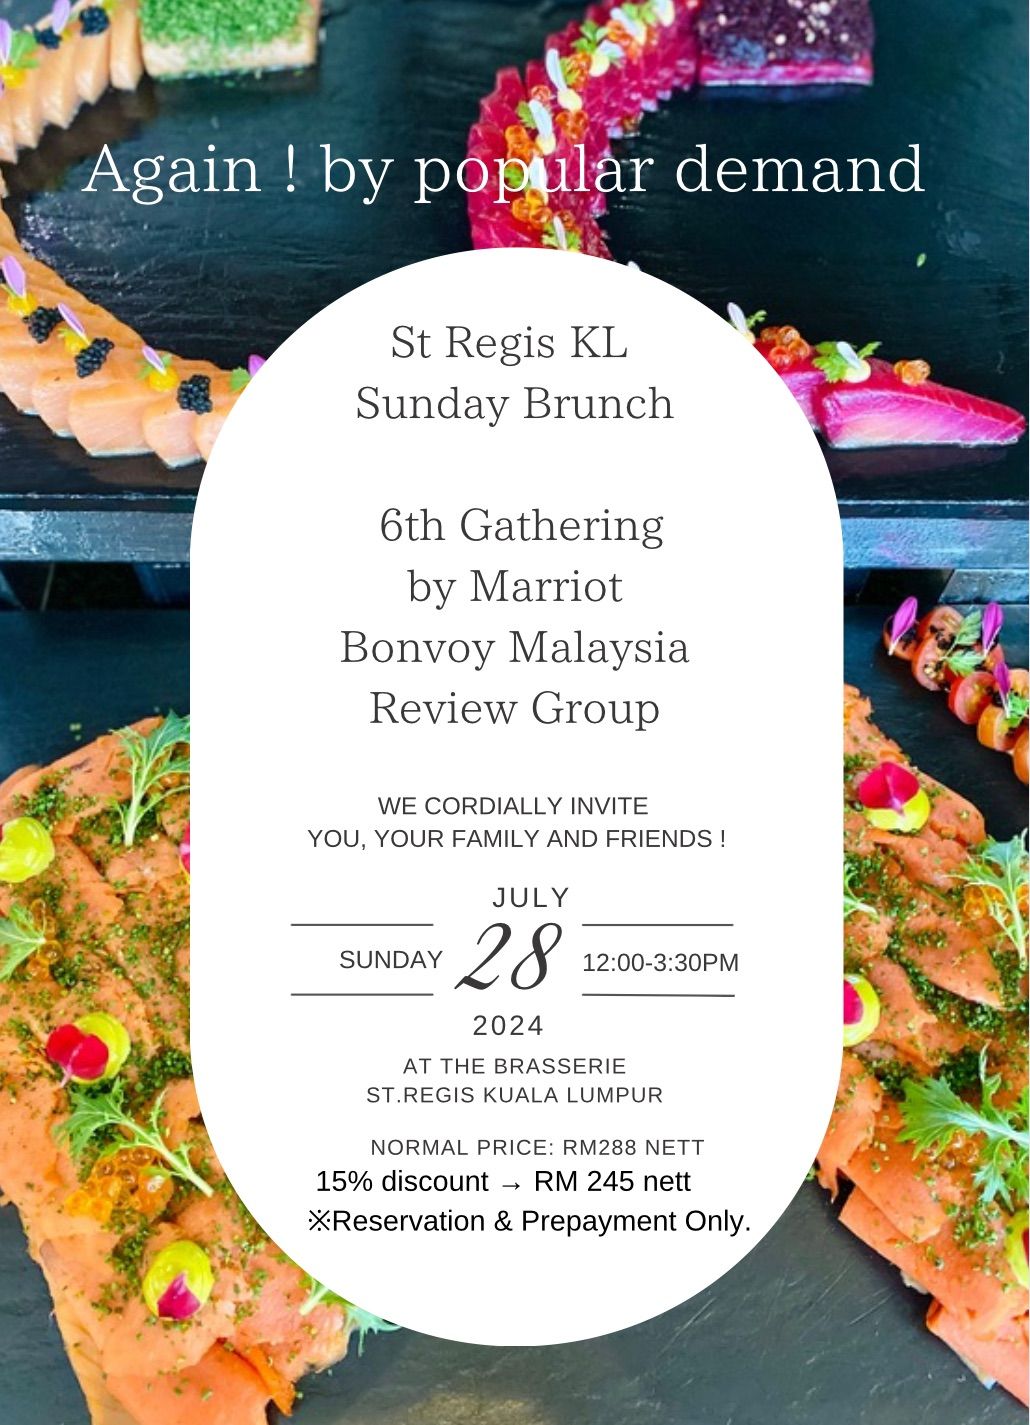 6th Event By Marriot Bonvoy Malaysia Review Group St Regis KL Sunday Brunch Gathering 